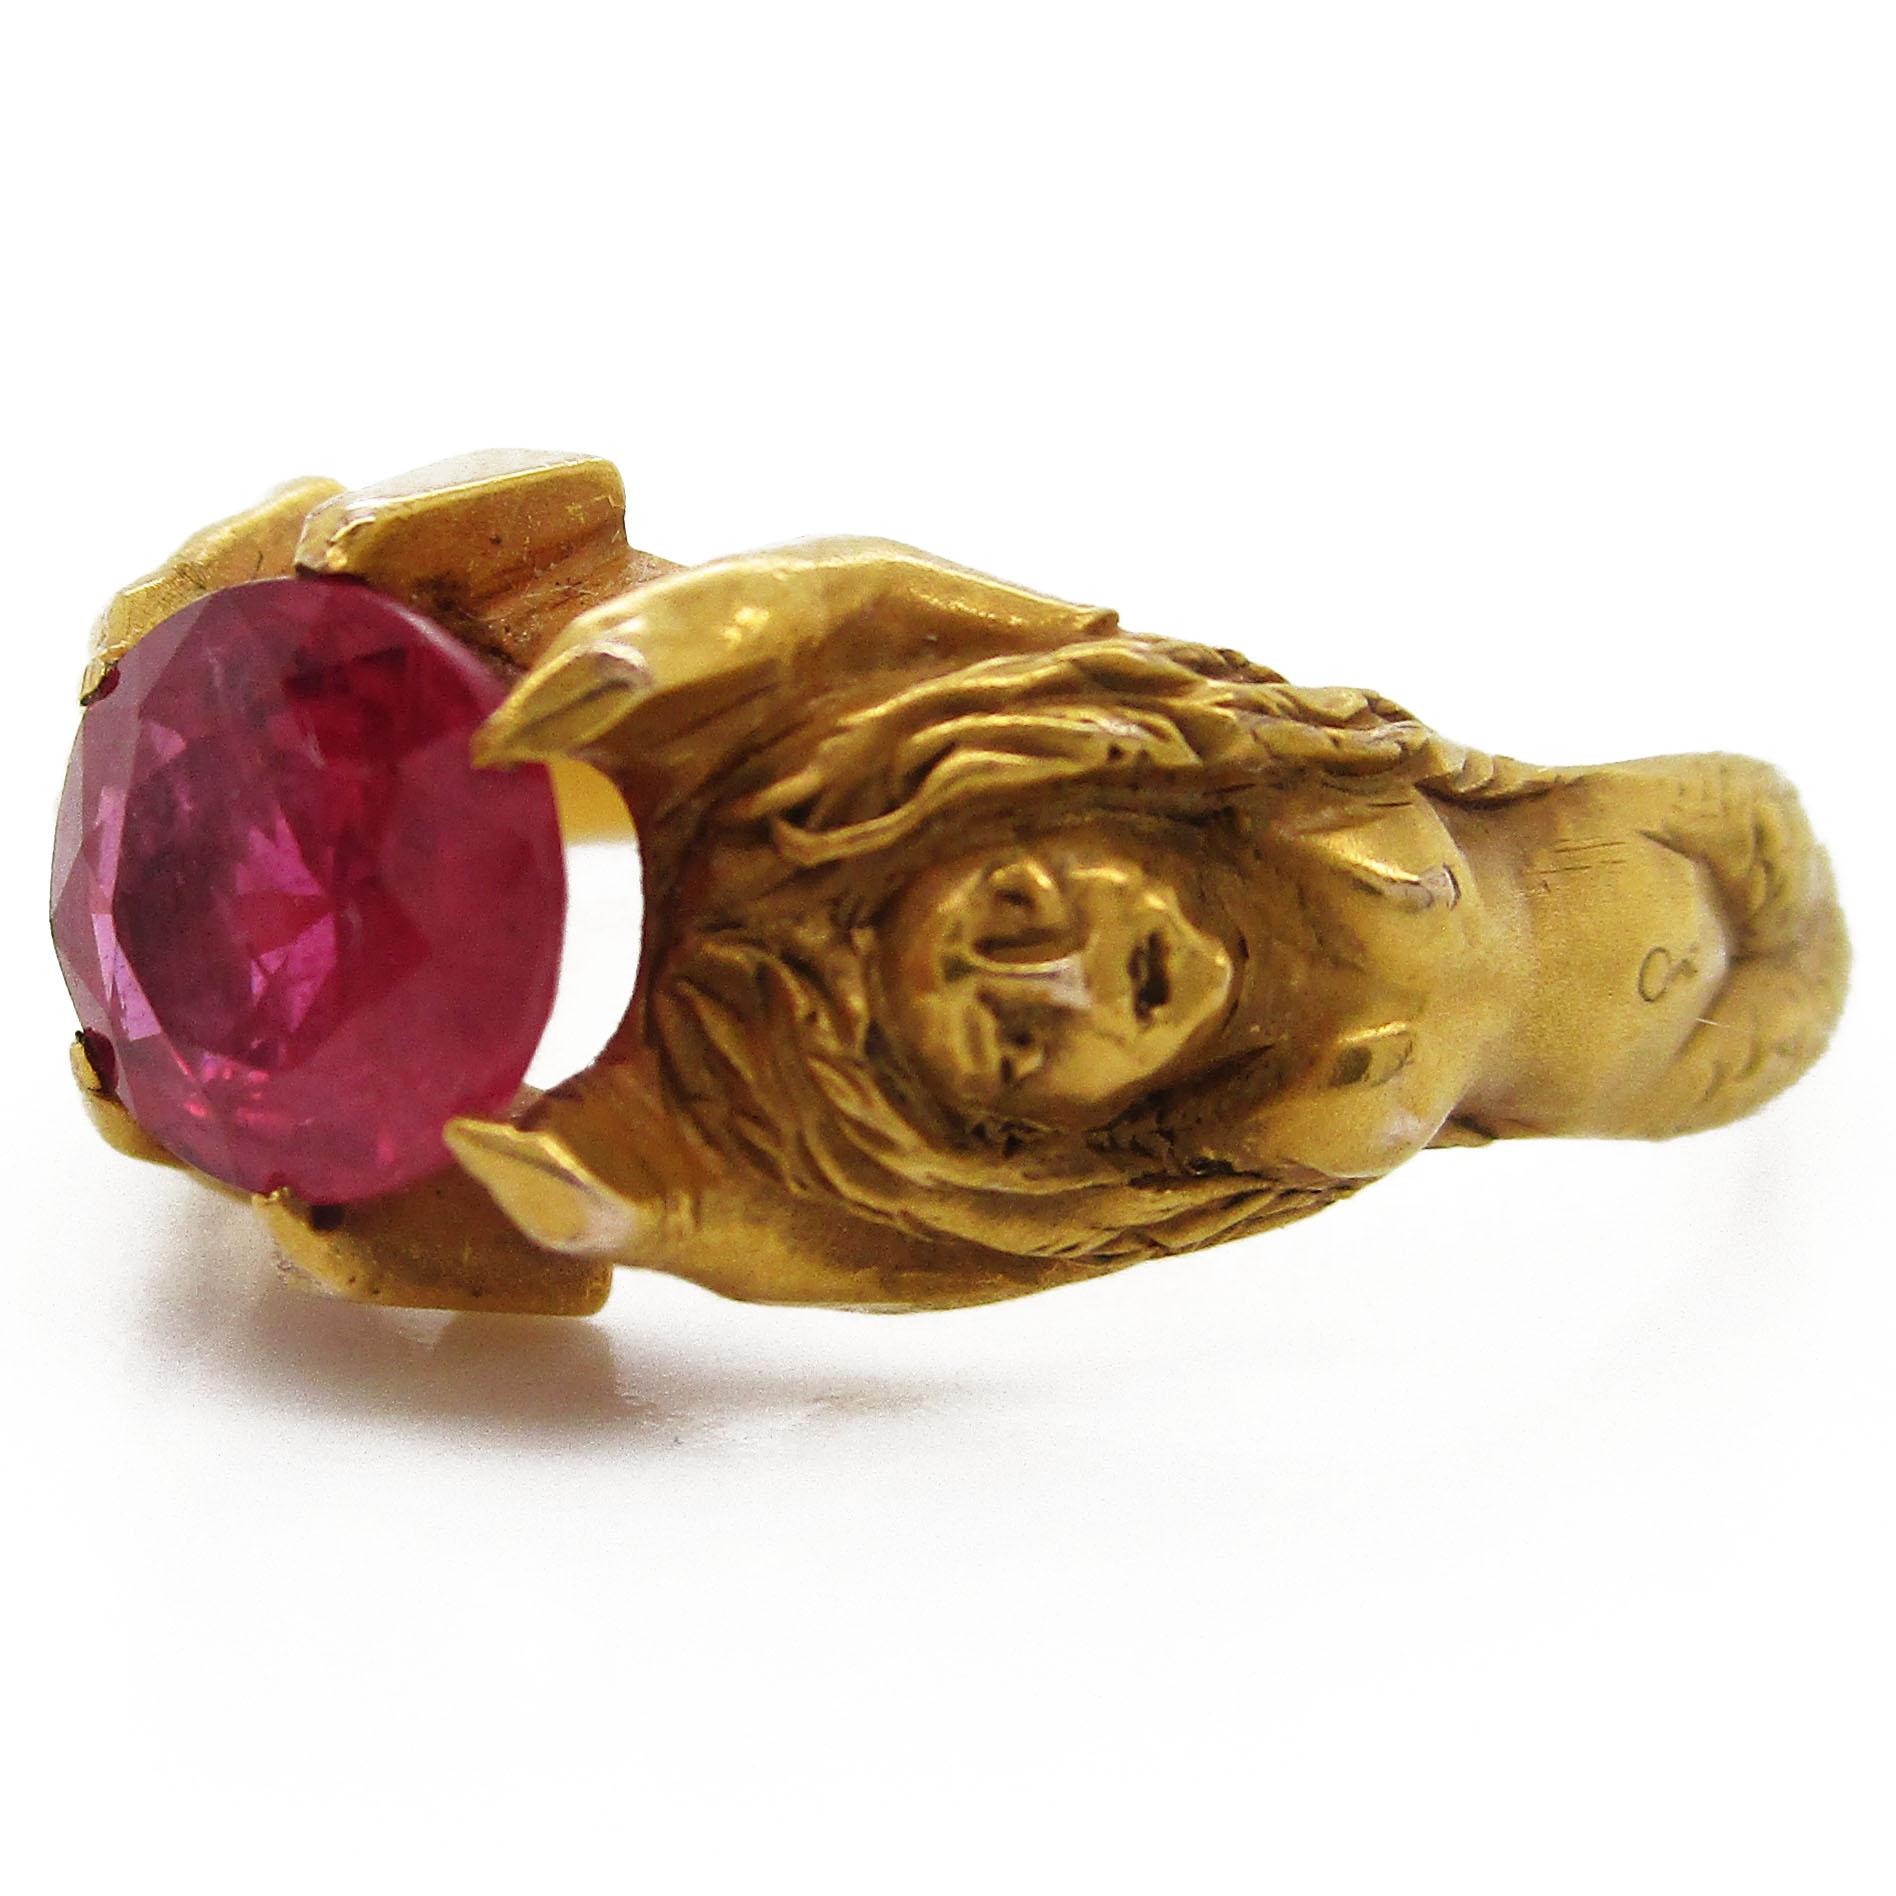 This gorgeous all original antique Art Nouveau ring dates back to 1890 and is full of timeless, classic beauty! The ring is solid 14 karat yellow gold with an incredibly detailed depiction of two mermaids with their arms raised. Their outstretched